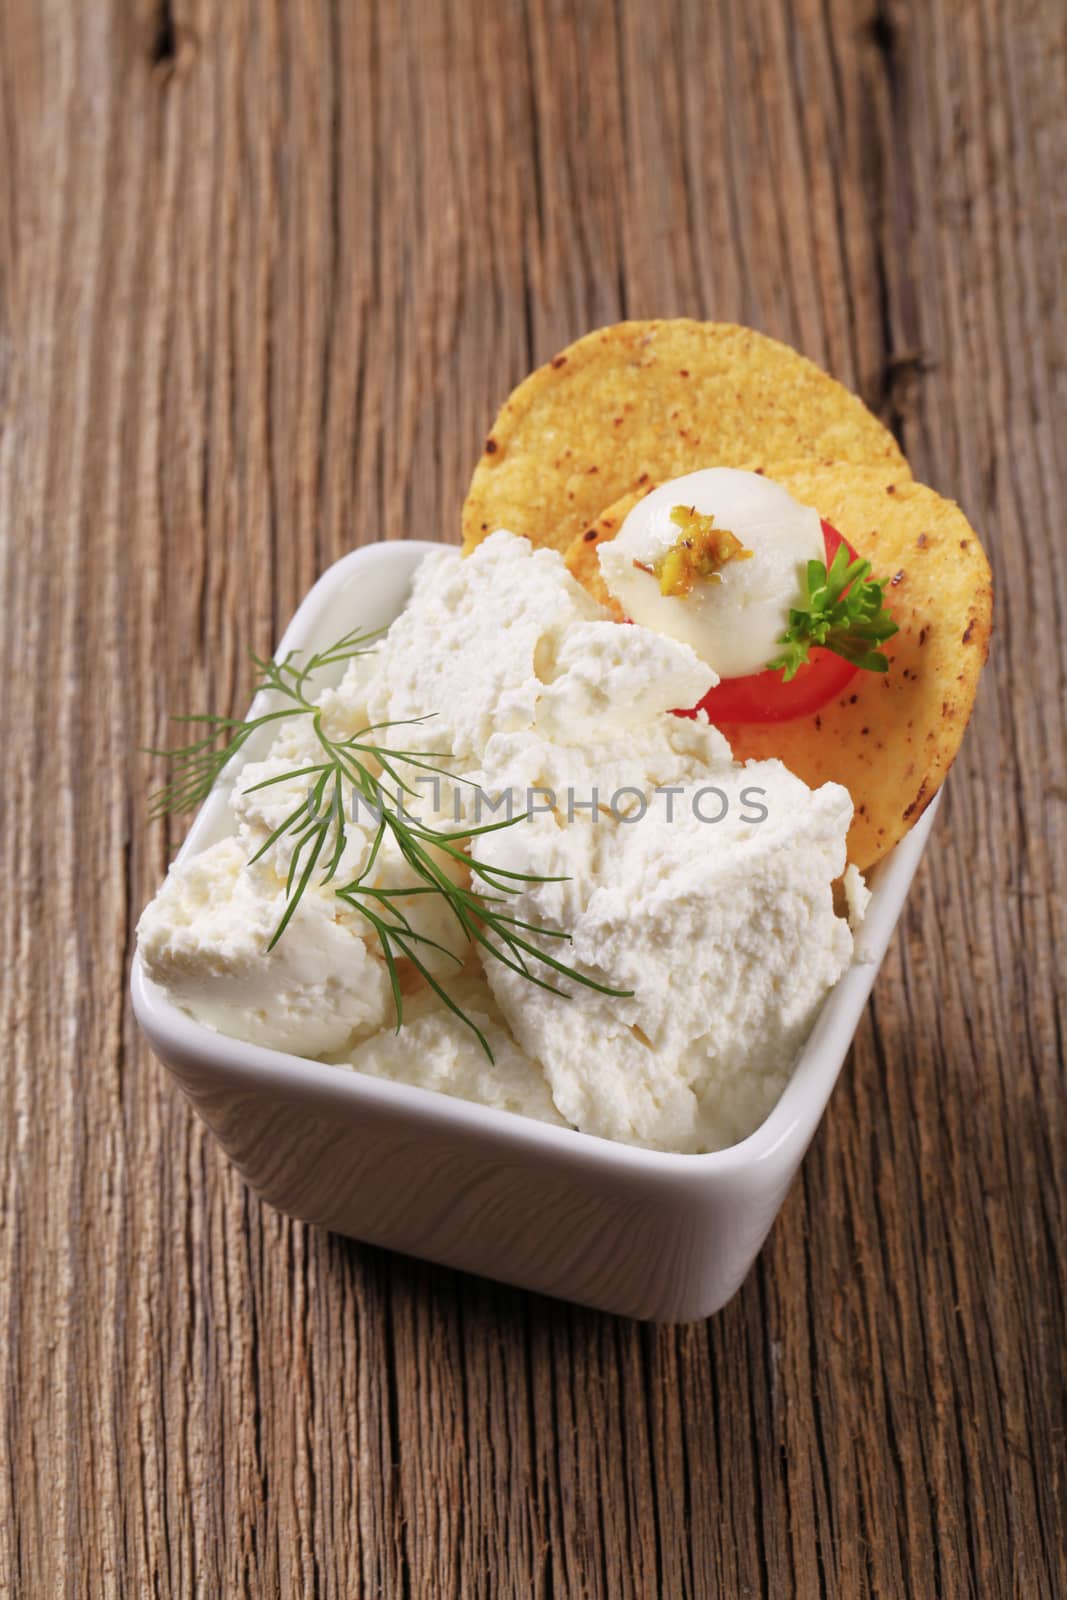 Appetizer - Fresh cheese and corn chips